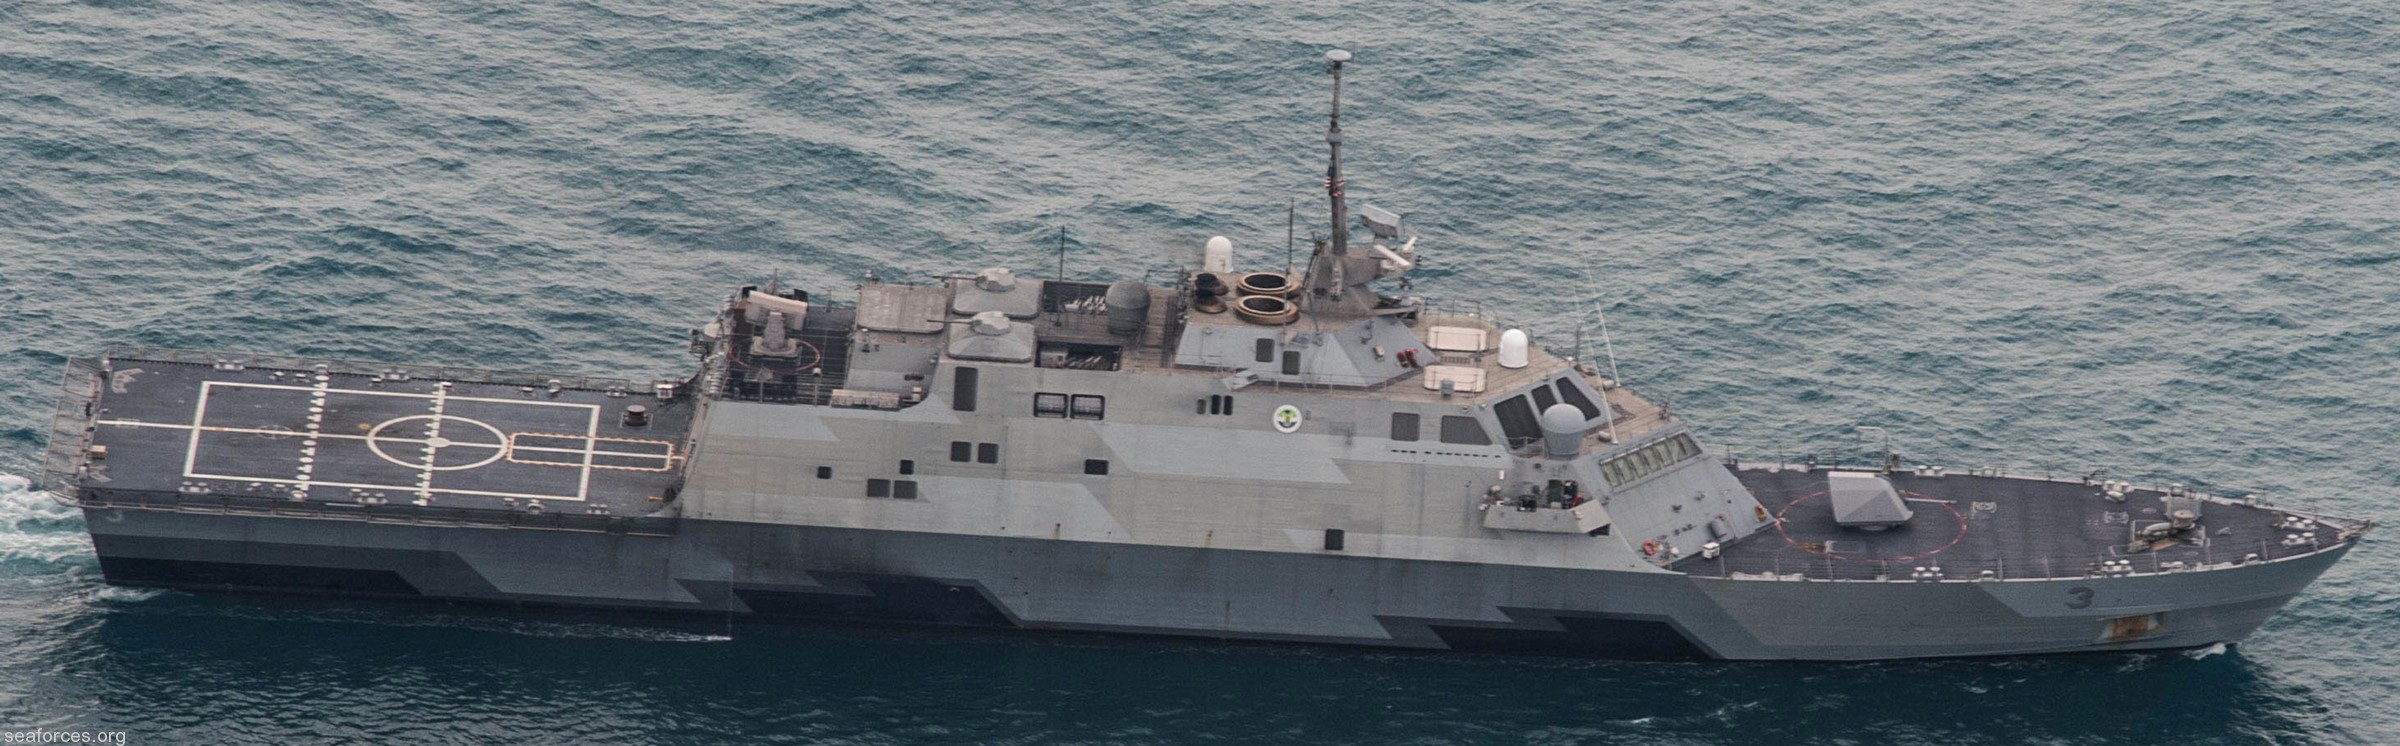 lcs-3 uss fort worth littoral combat ship freedom class us navy 25